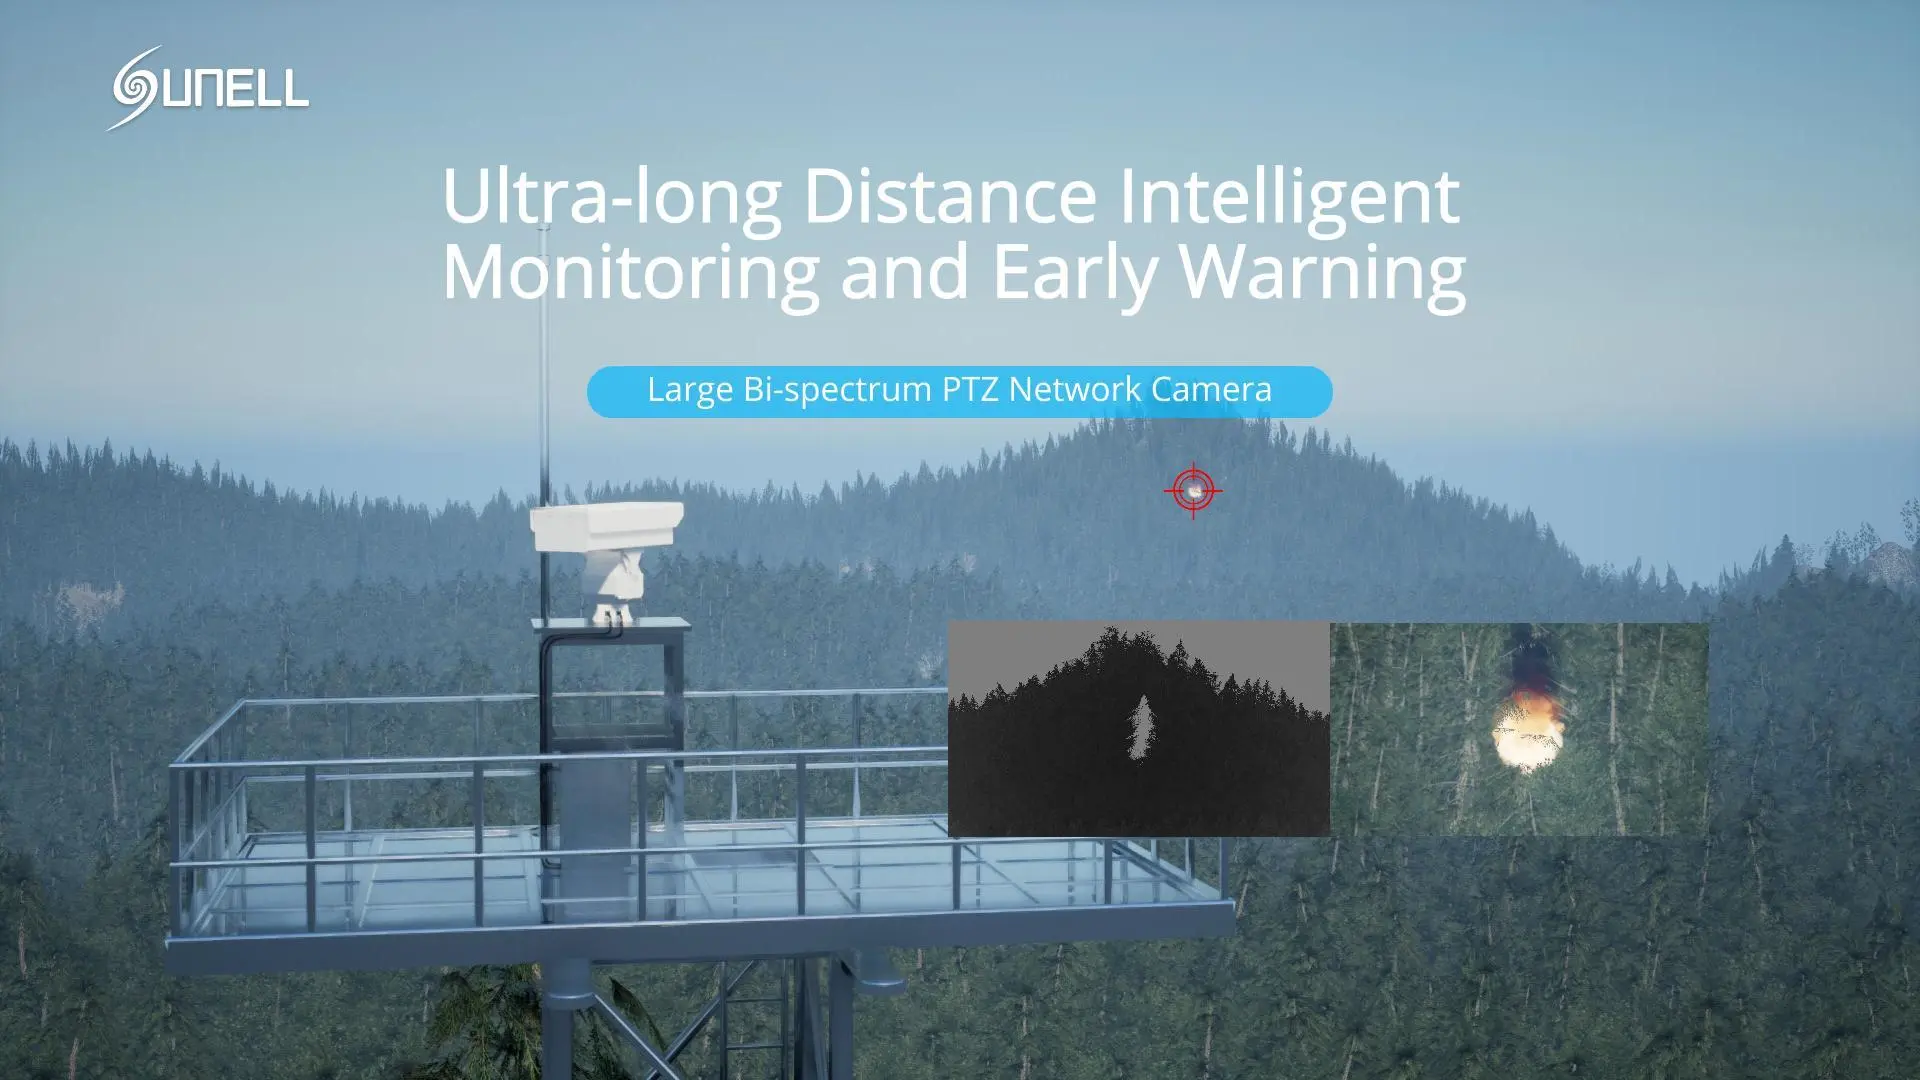 How to use thermal imaging PTZ camera to detect early fires and minimize losses caused by wildfires? - 翻译中...